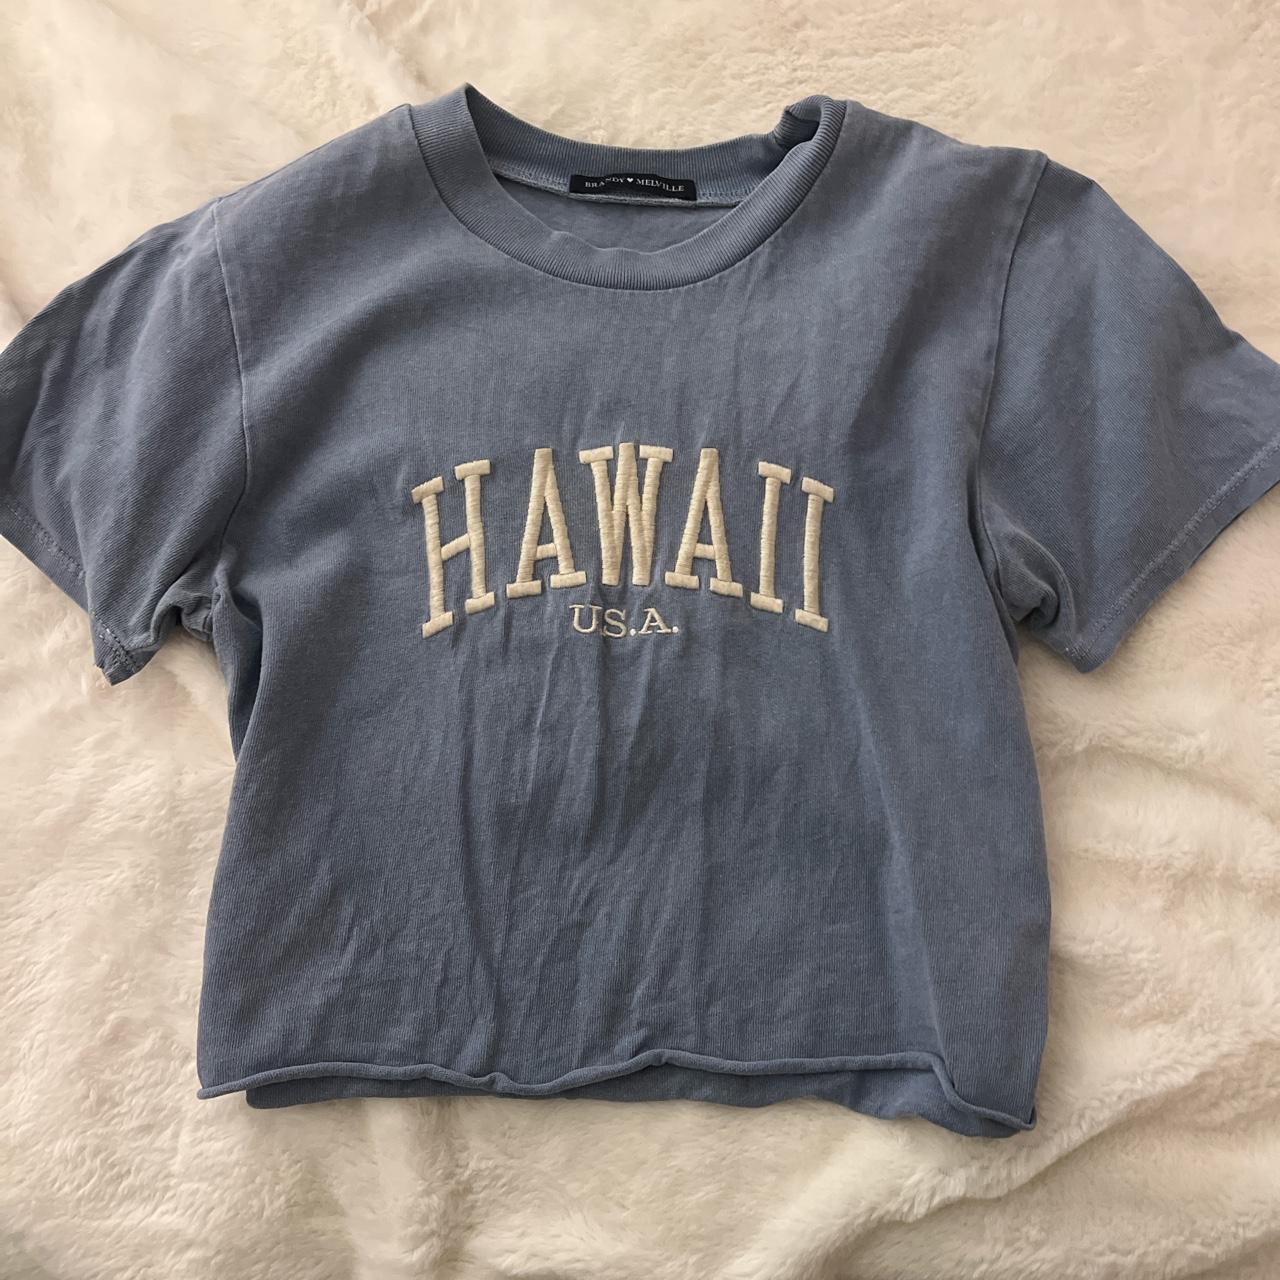 Brandy Melville Women's Clothes for sale in Honolulu, Hawaii